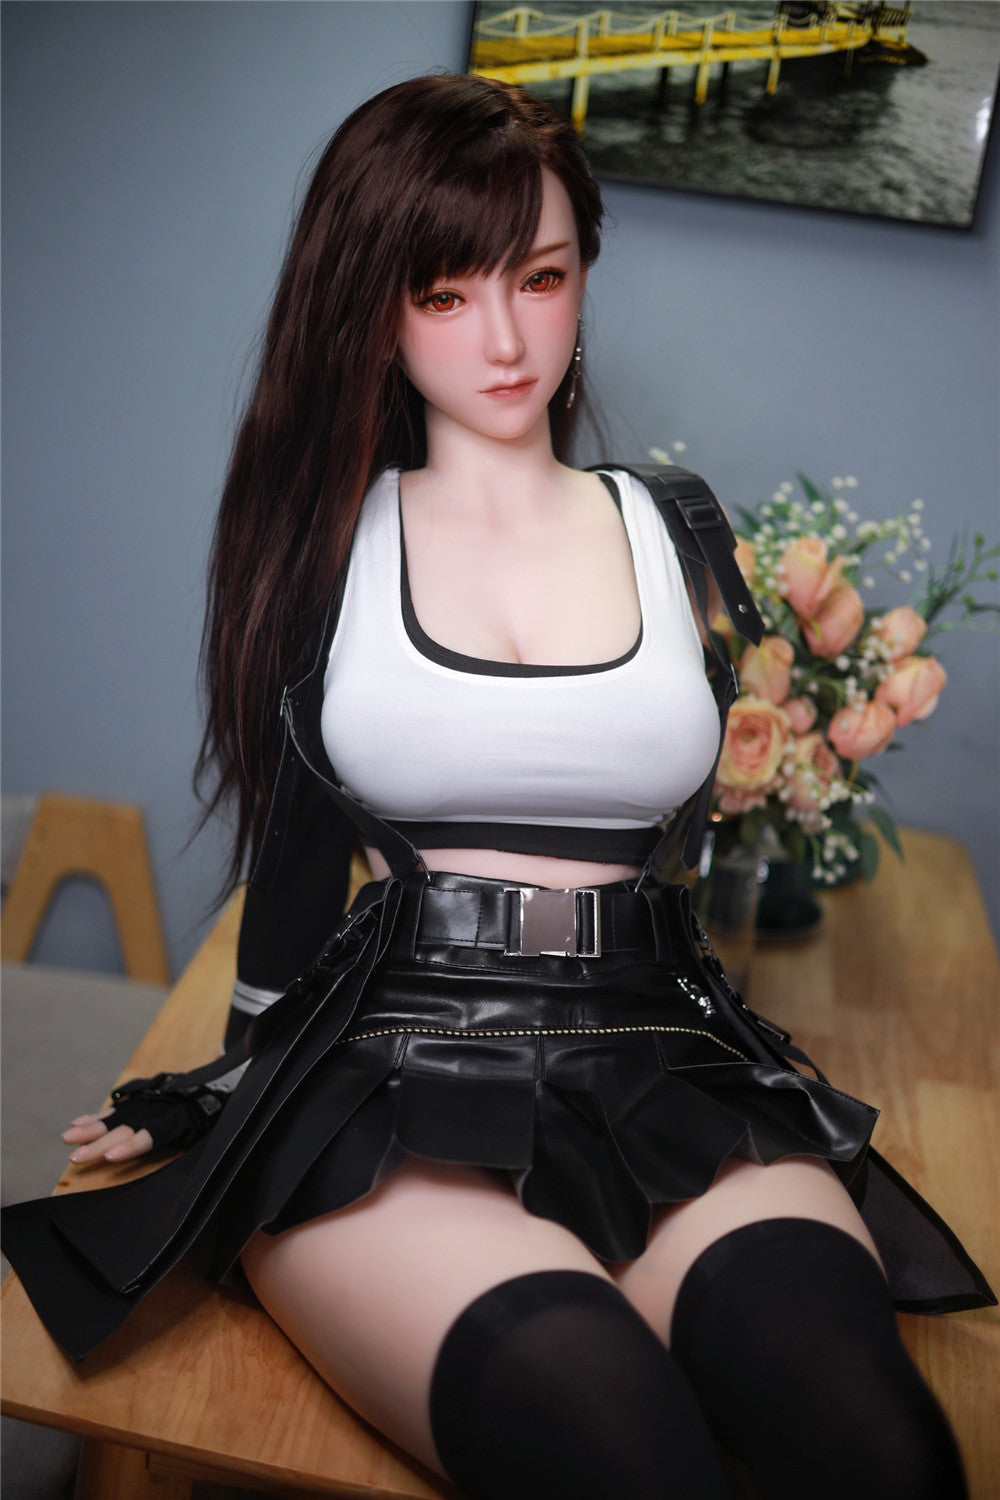 JY Doll - Real Sex Doll - 5ft 4in (163cm) - Madison - Love Dolls 4U